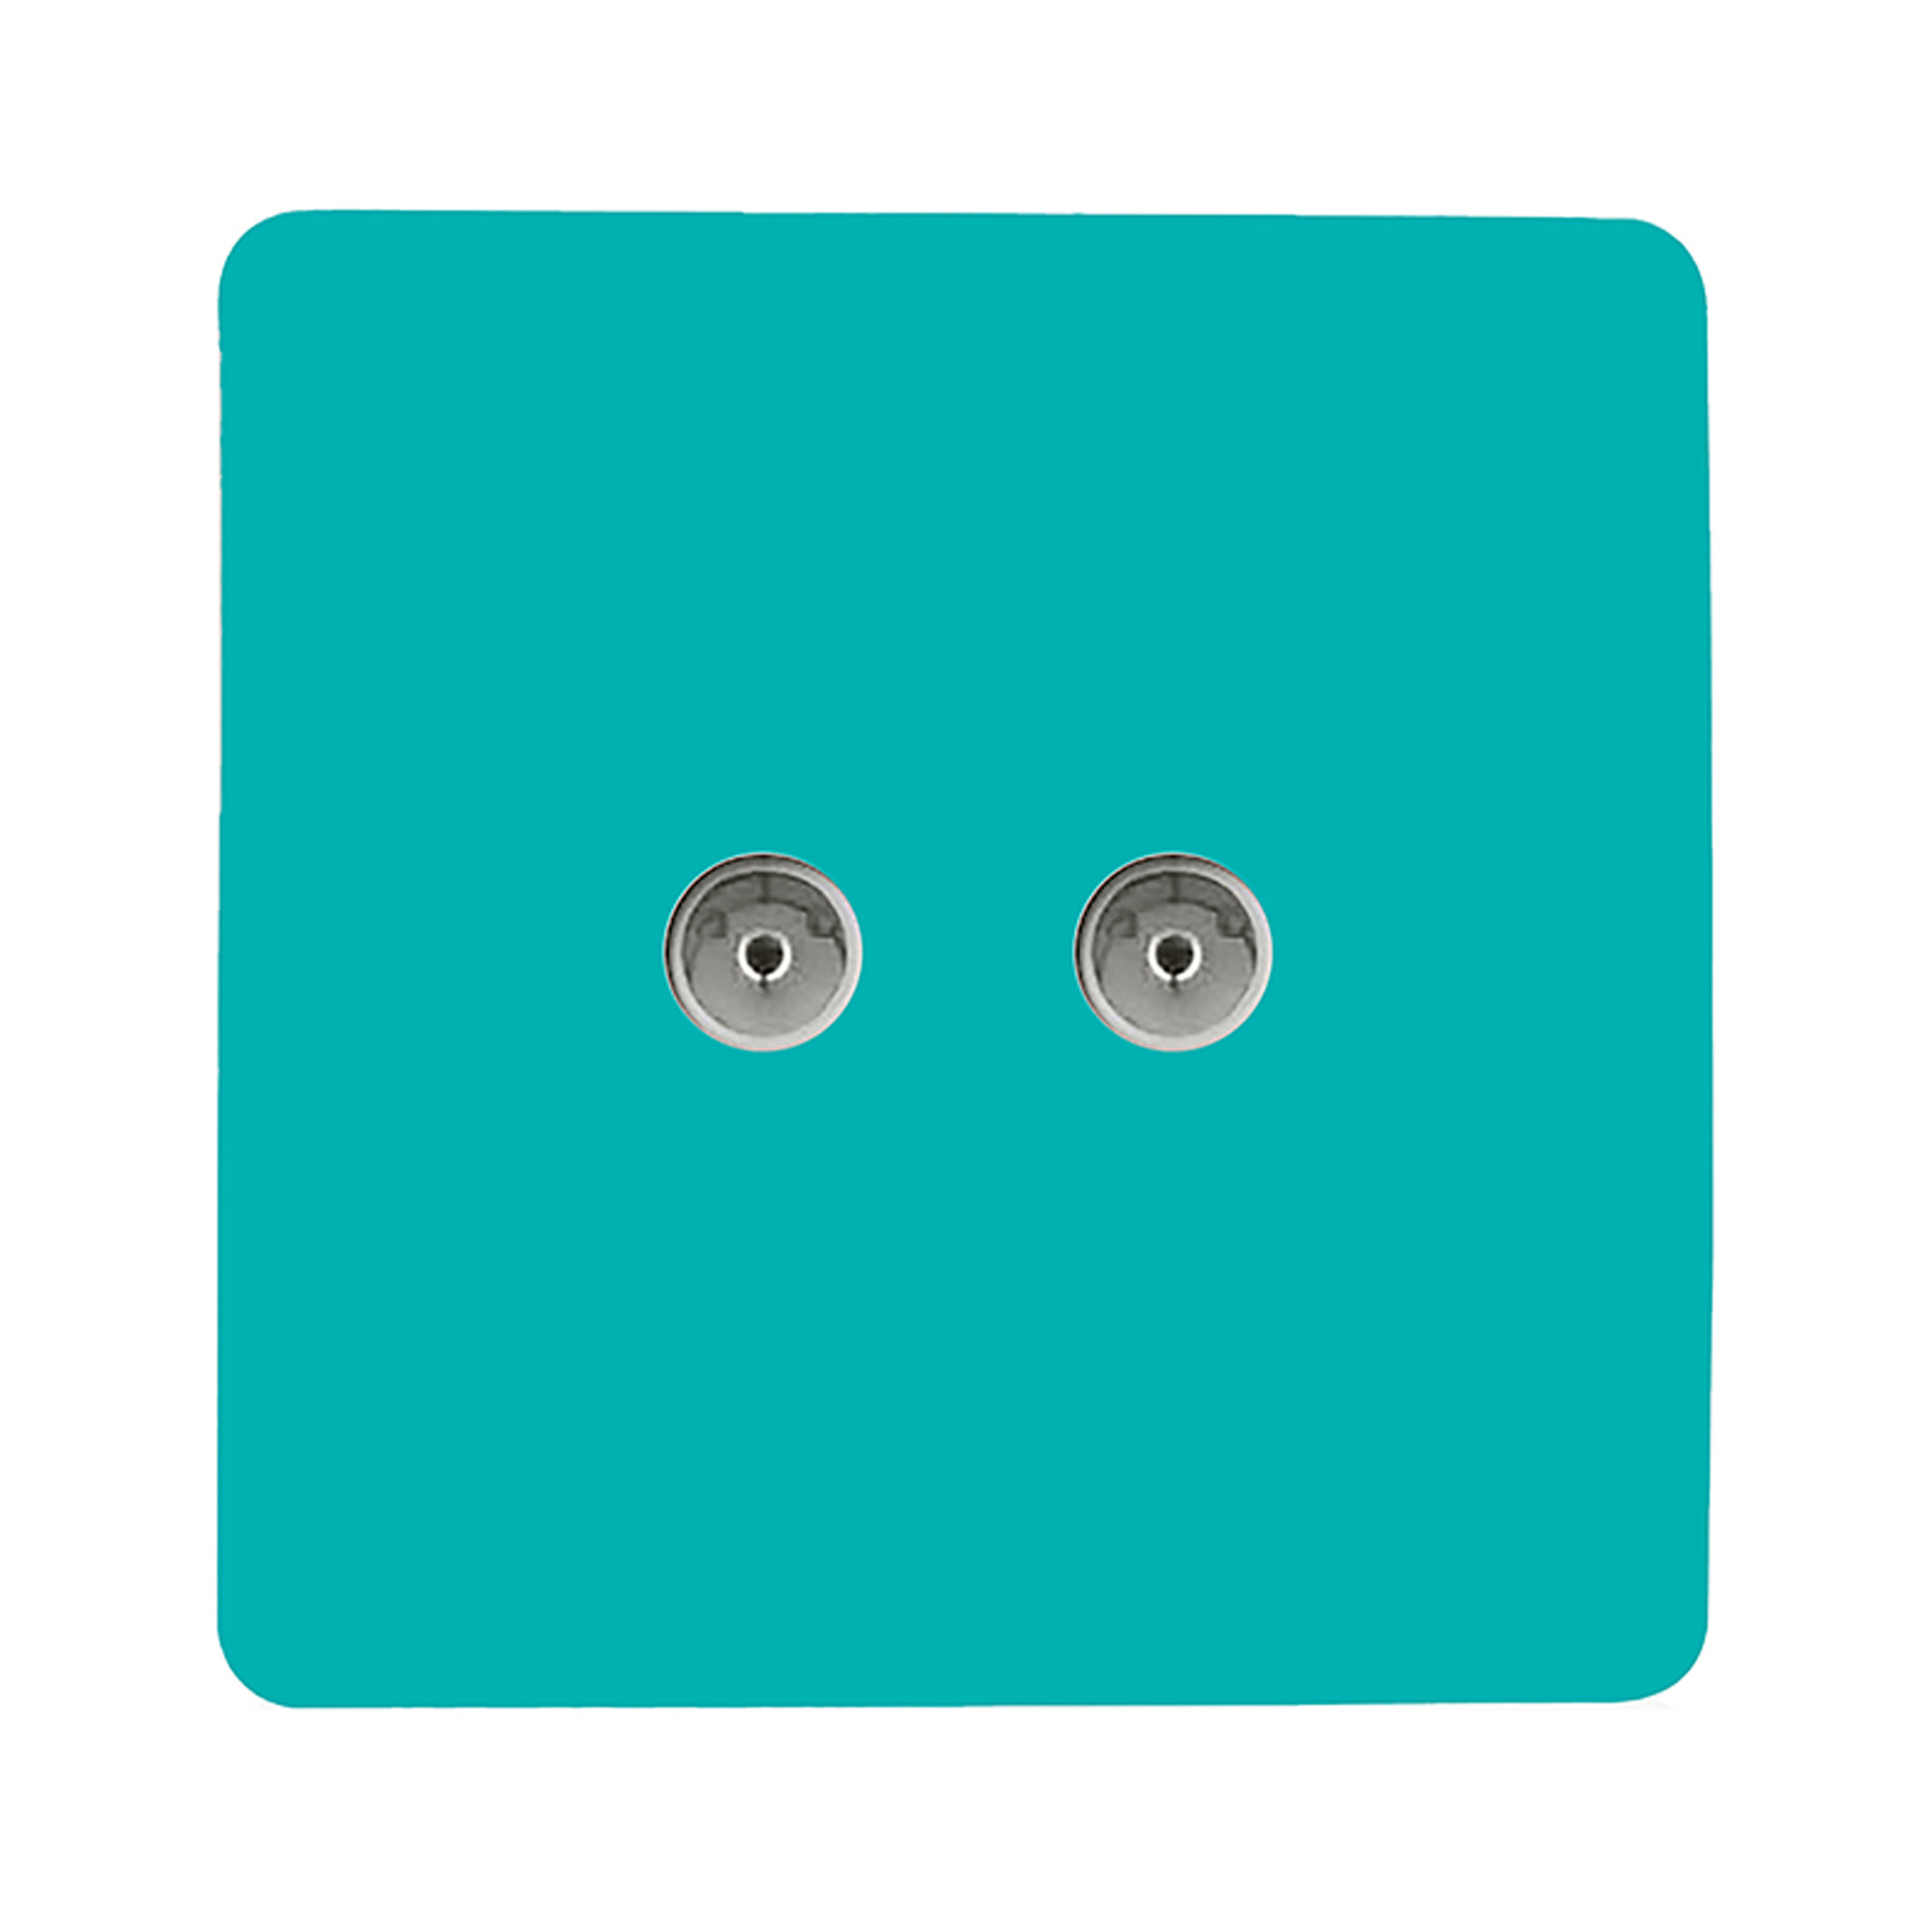 ART-2TVSBT  Twin TV Co-Axial Outlet Bright Teal